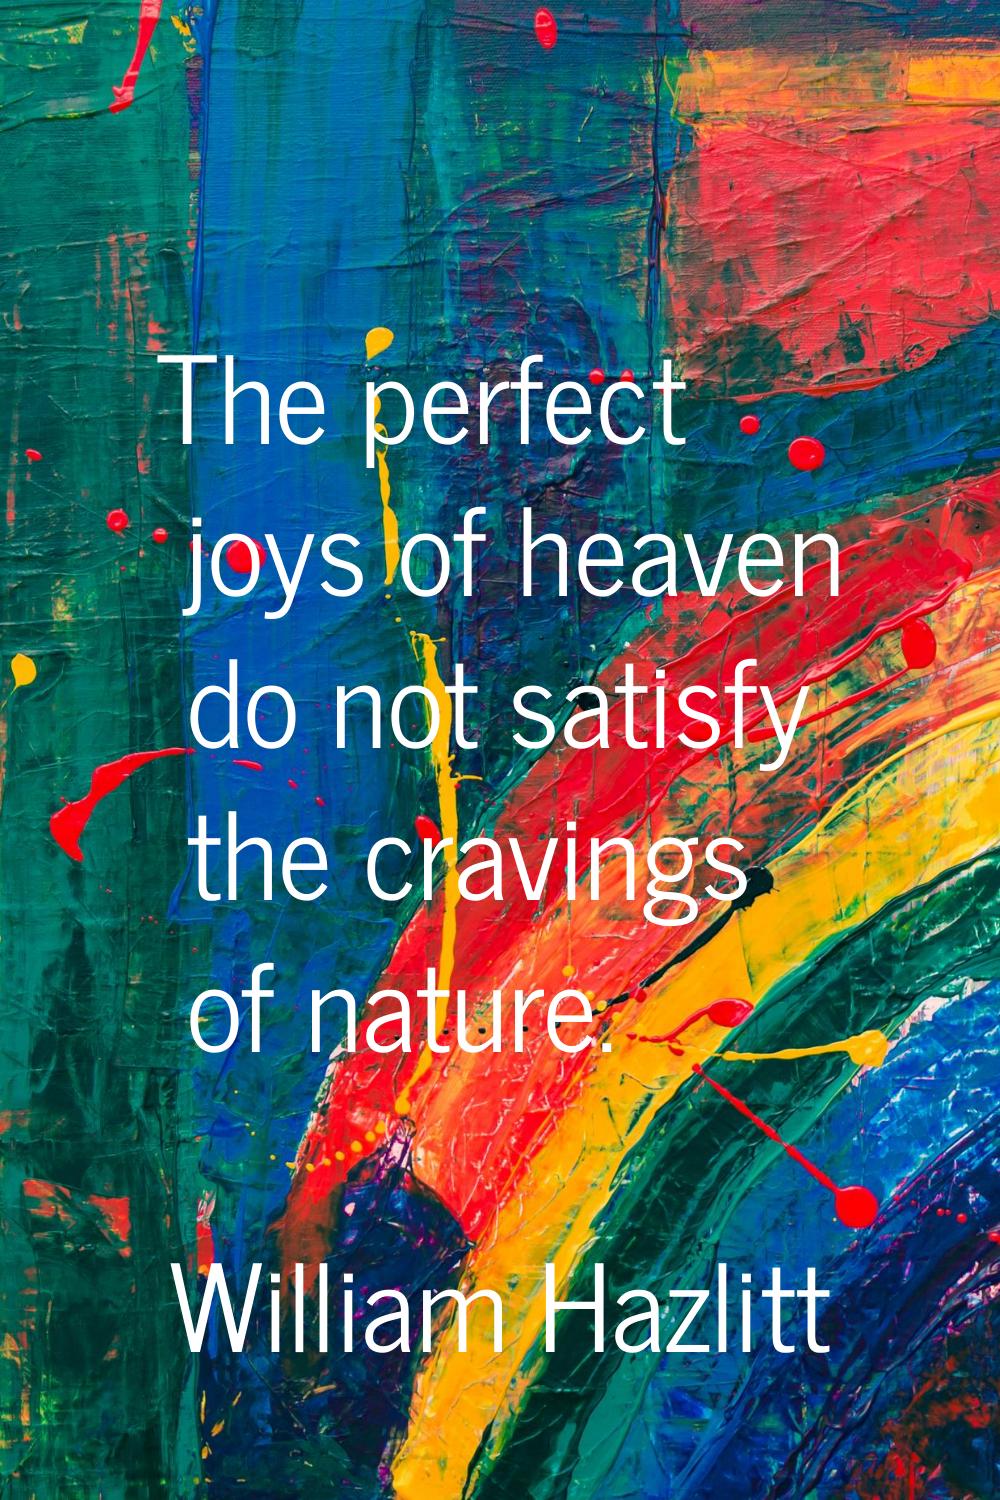 The perfect joys of heaven do not satisfy the cravings of nature.